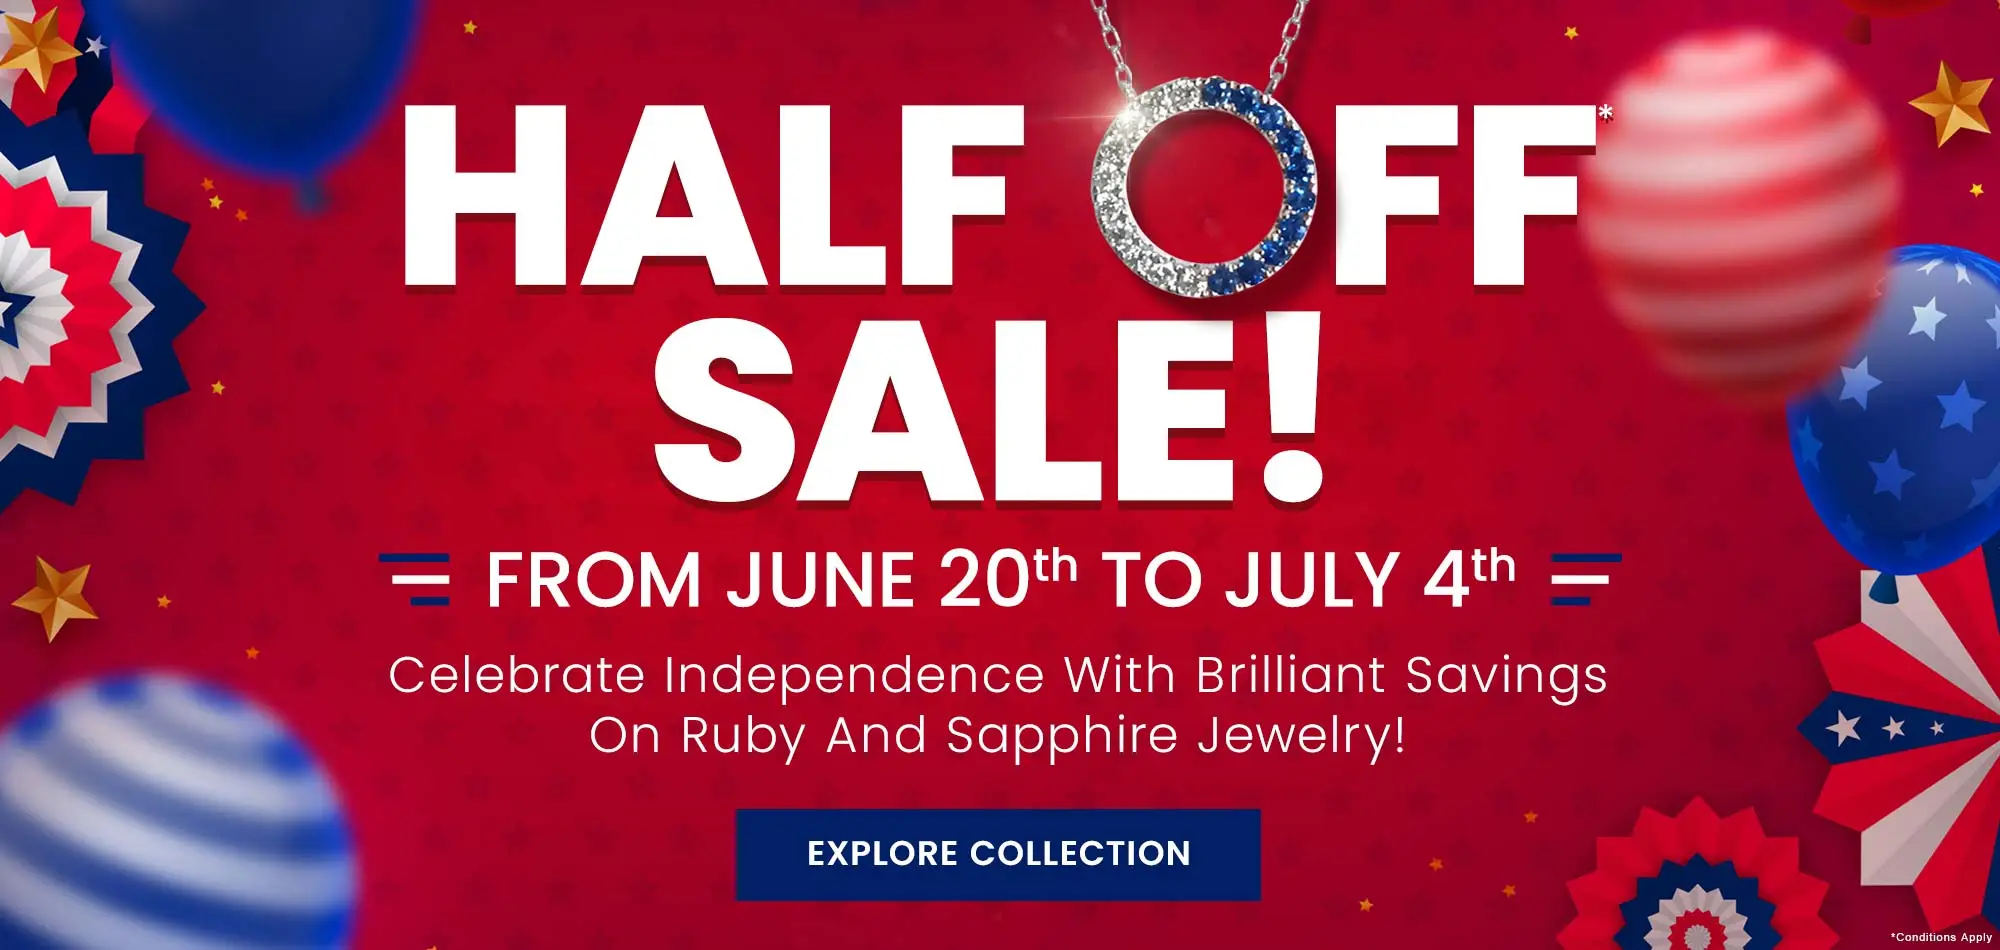 Half off Sale on Ruby and Sapphire Jewelry at M&M Jewelers